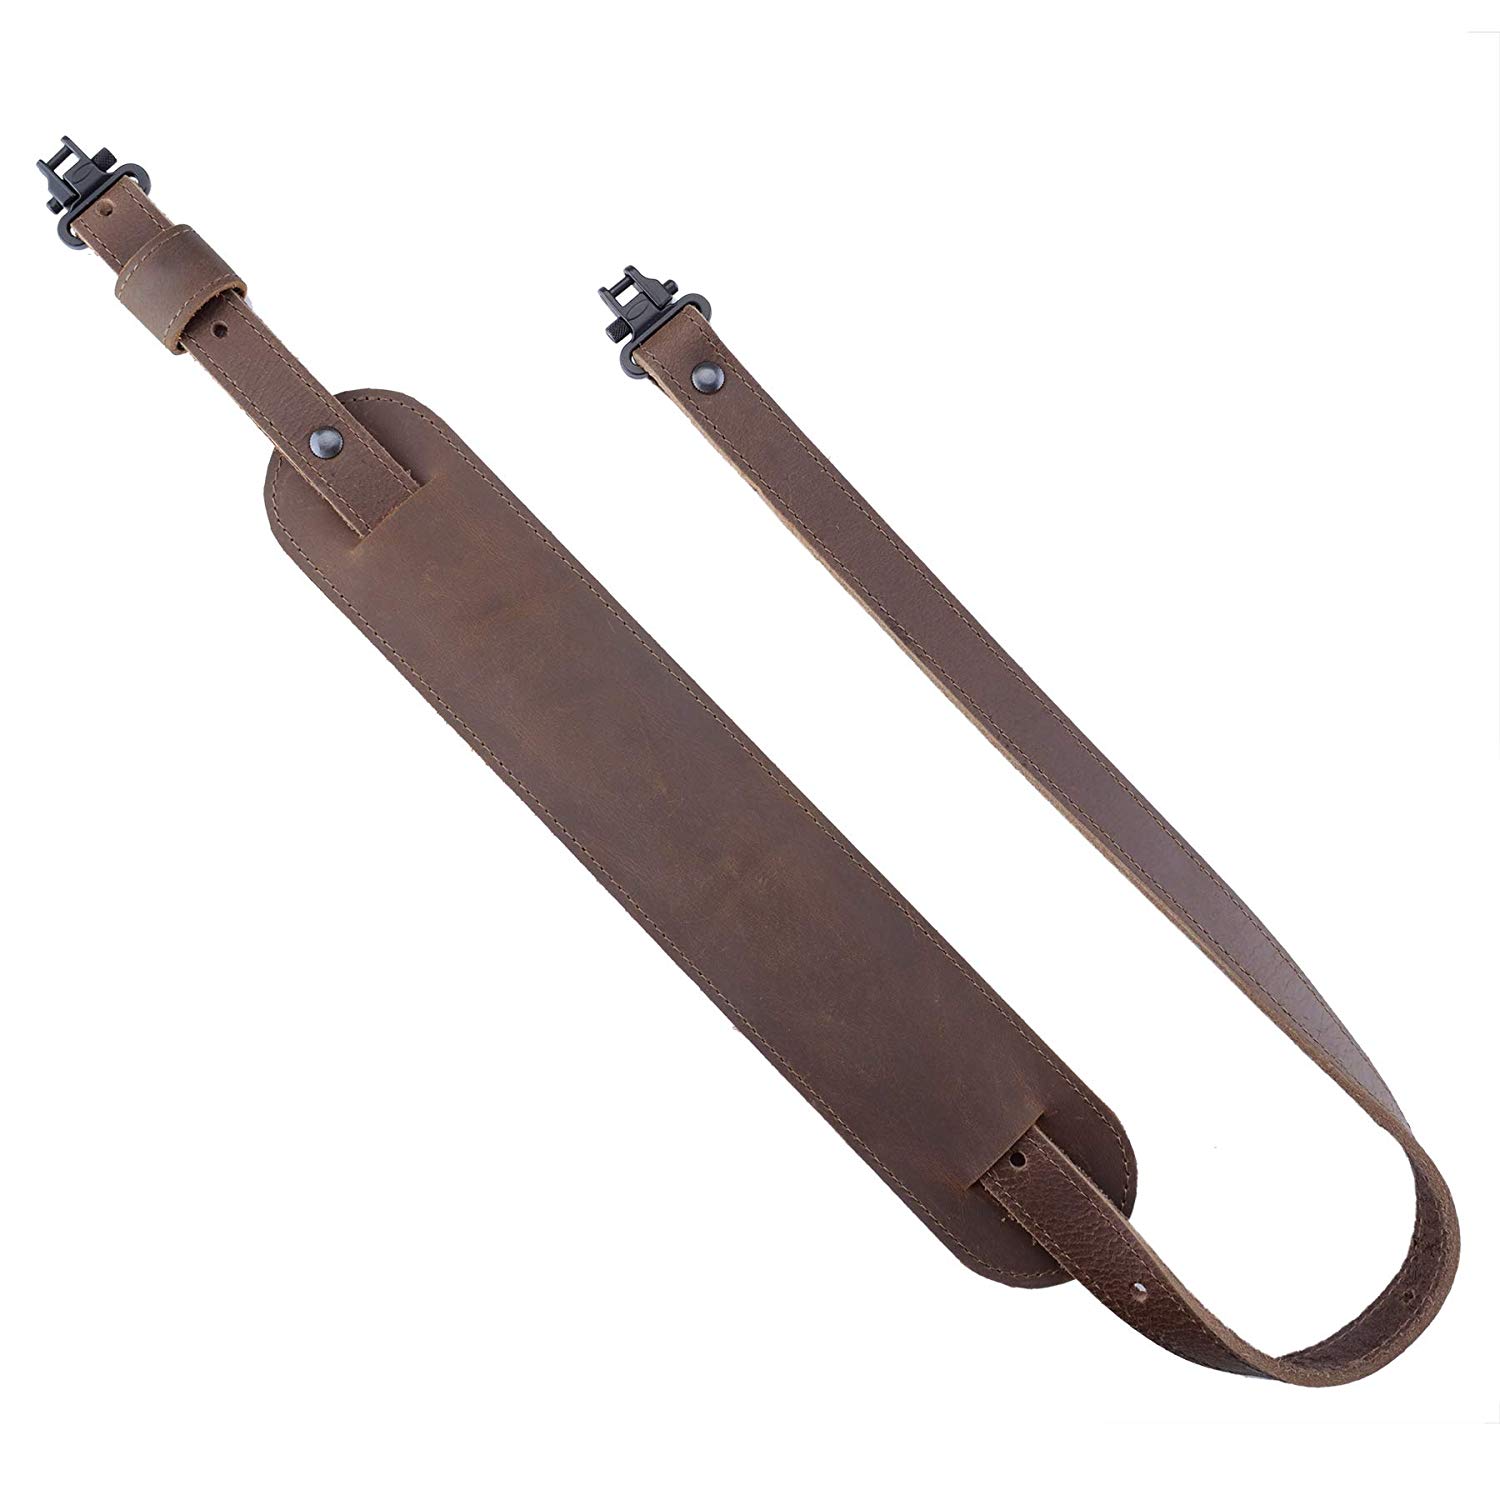 Buffalo Hide Leather Rifle Gun Sling with Padding - $18.99 (Free S/H ...